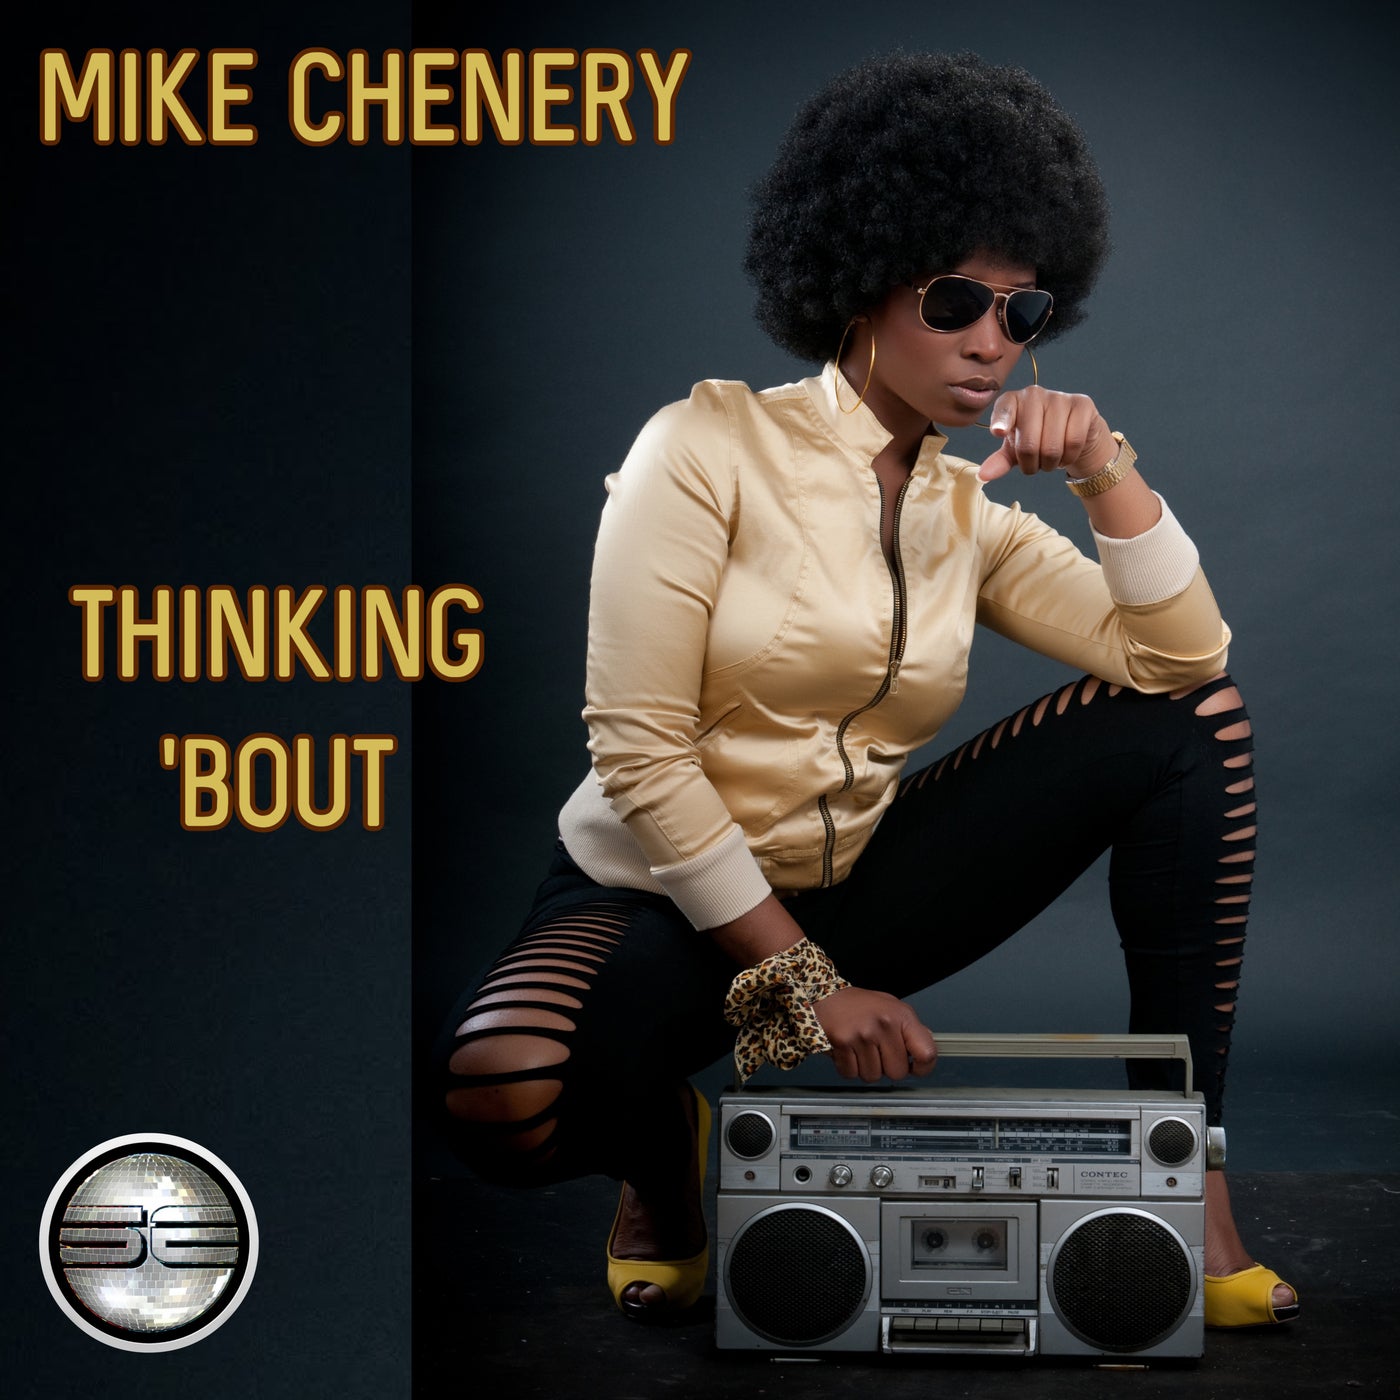 Mike Chenery - Thinking 'Bout [SER209]